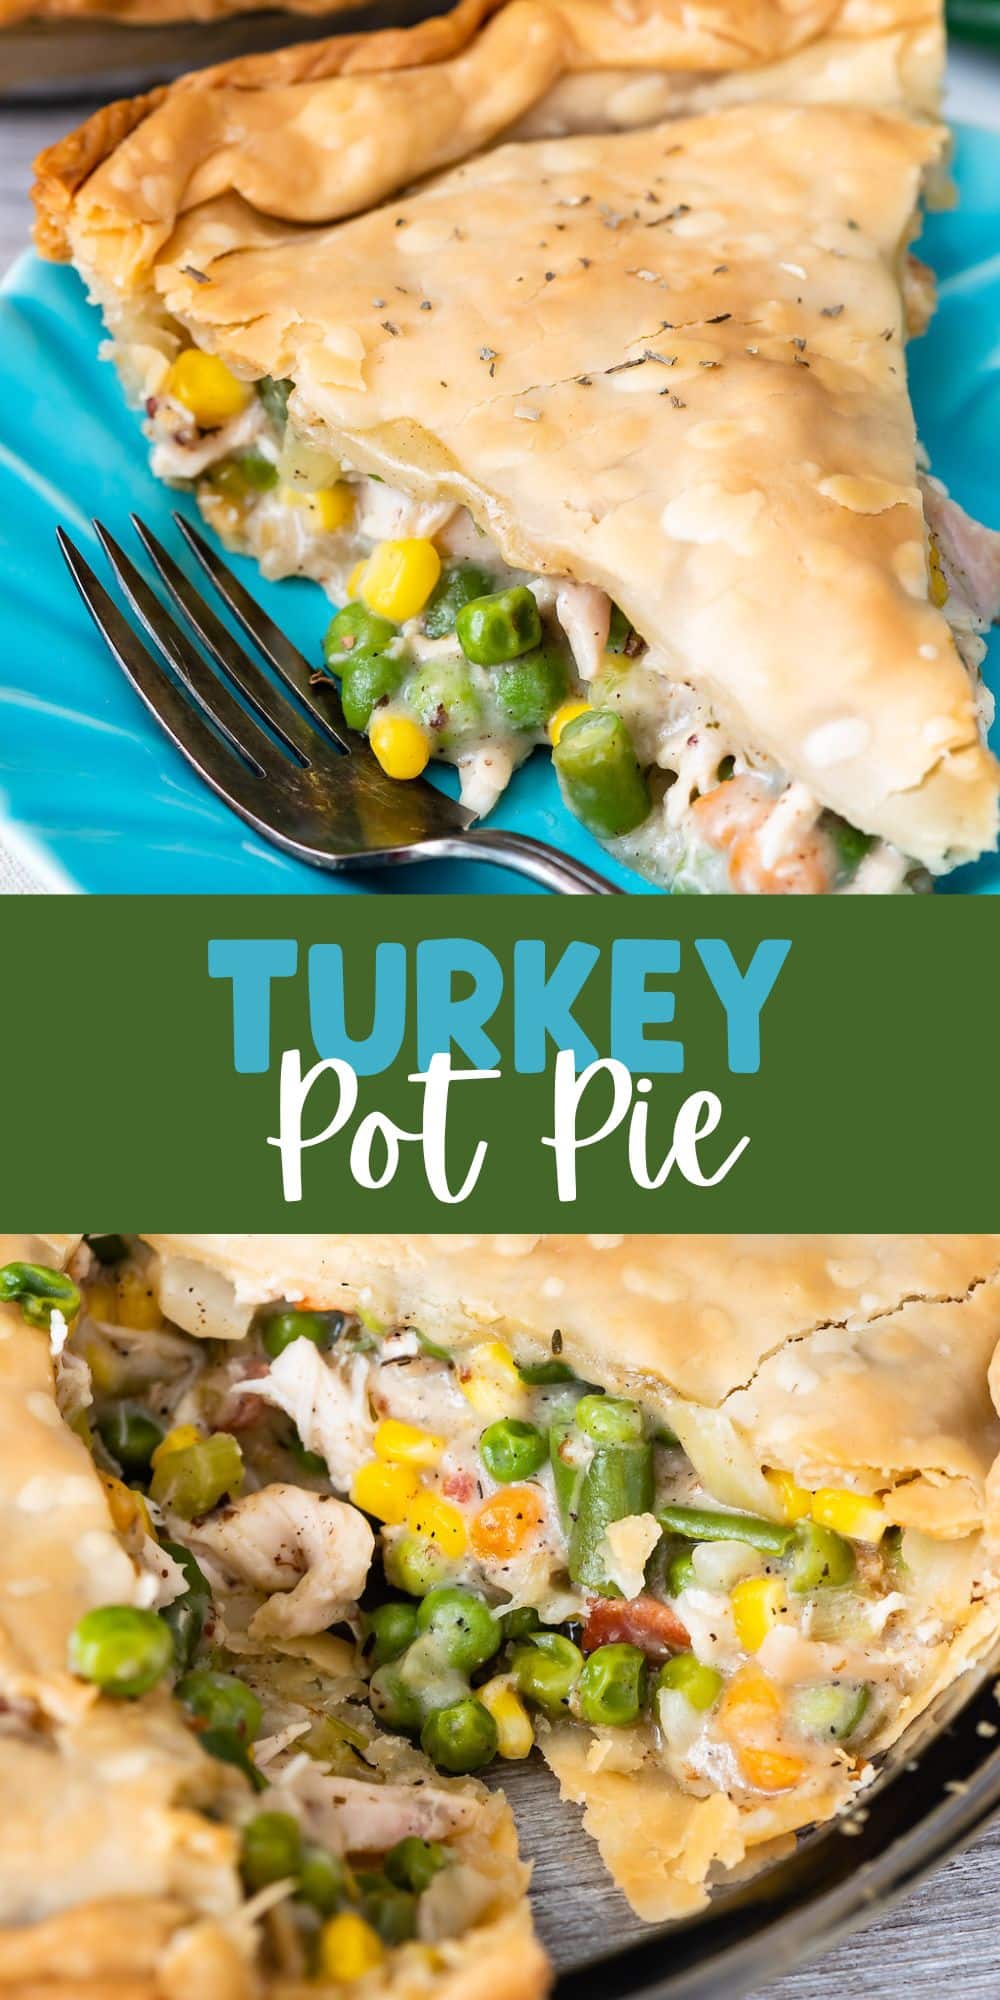 two photos of pot pie filled with veggies and chicken with words in the middle